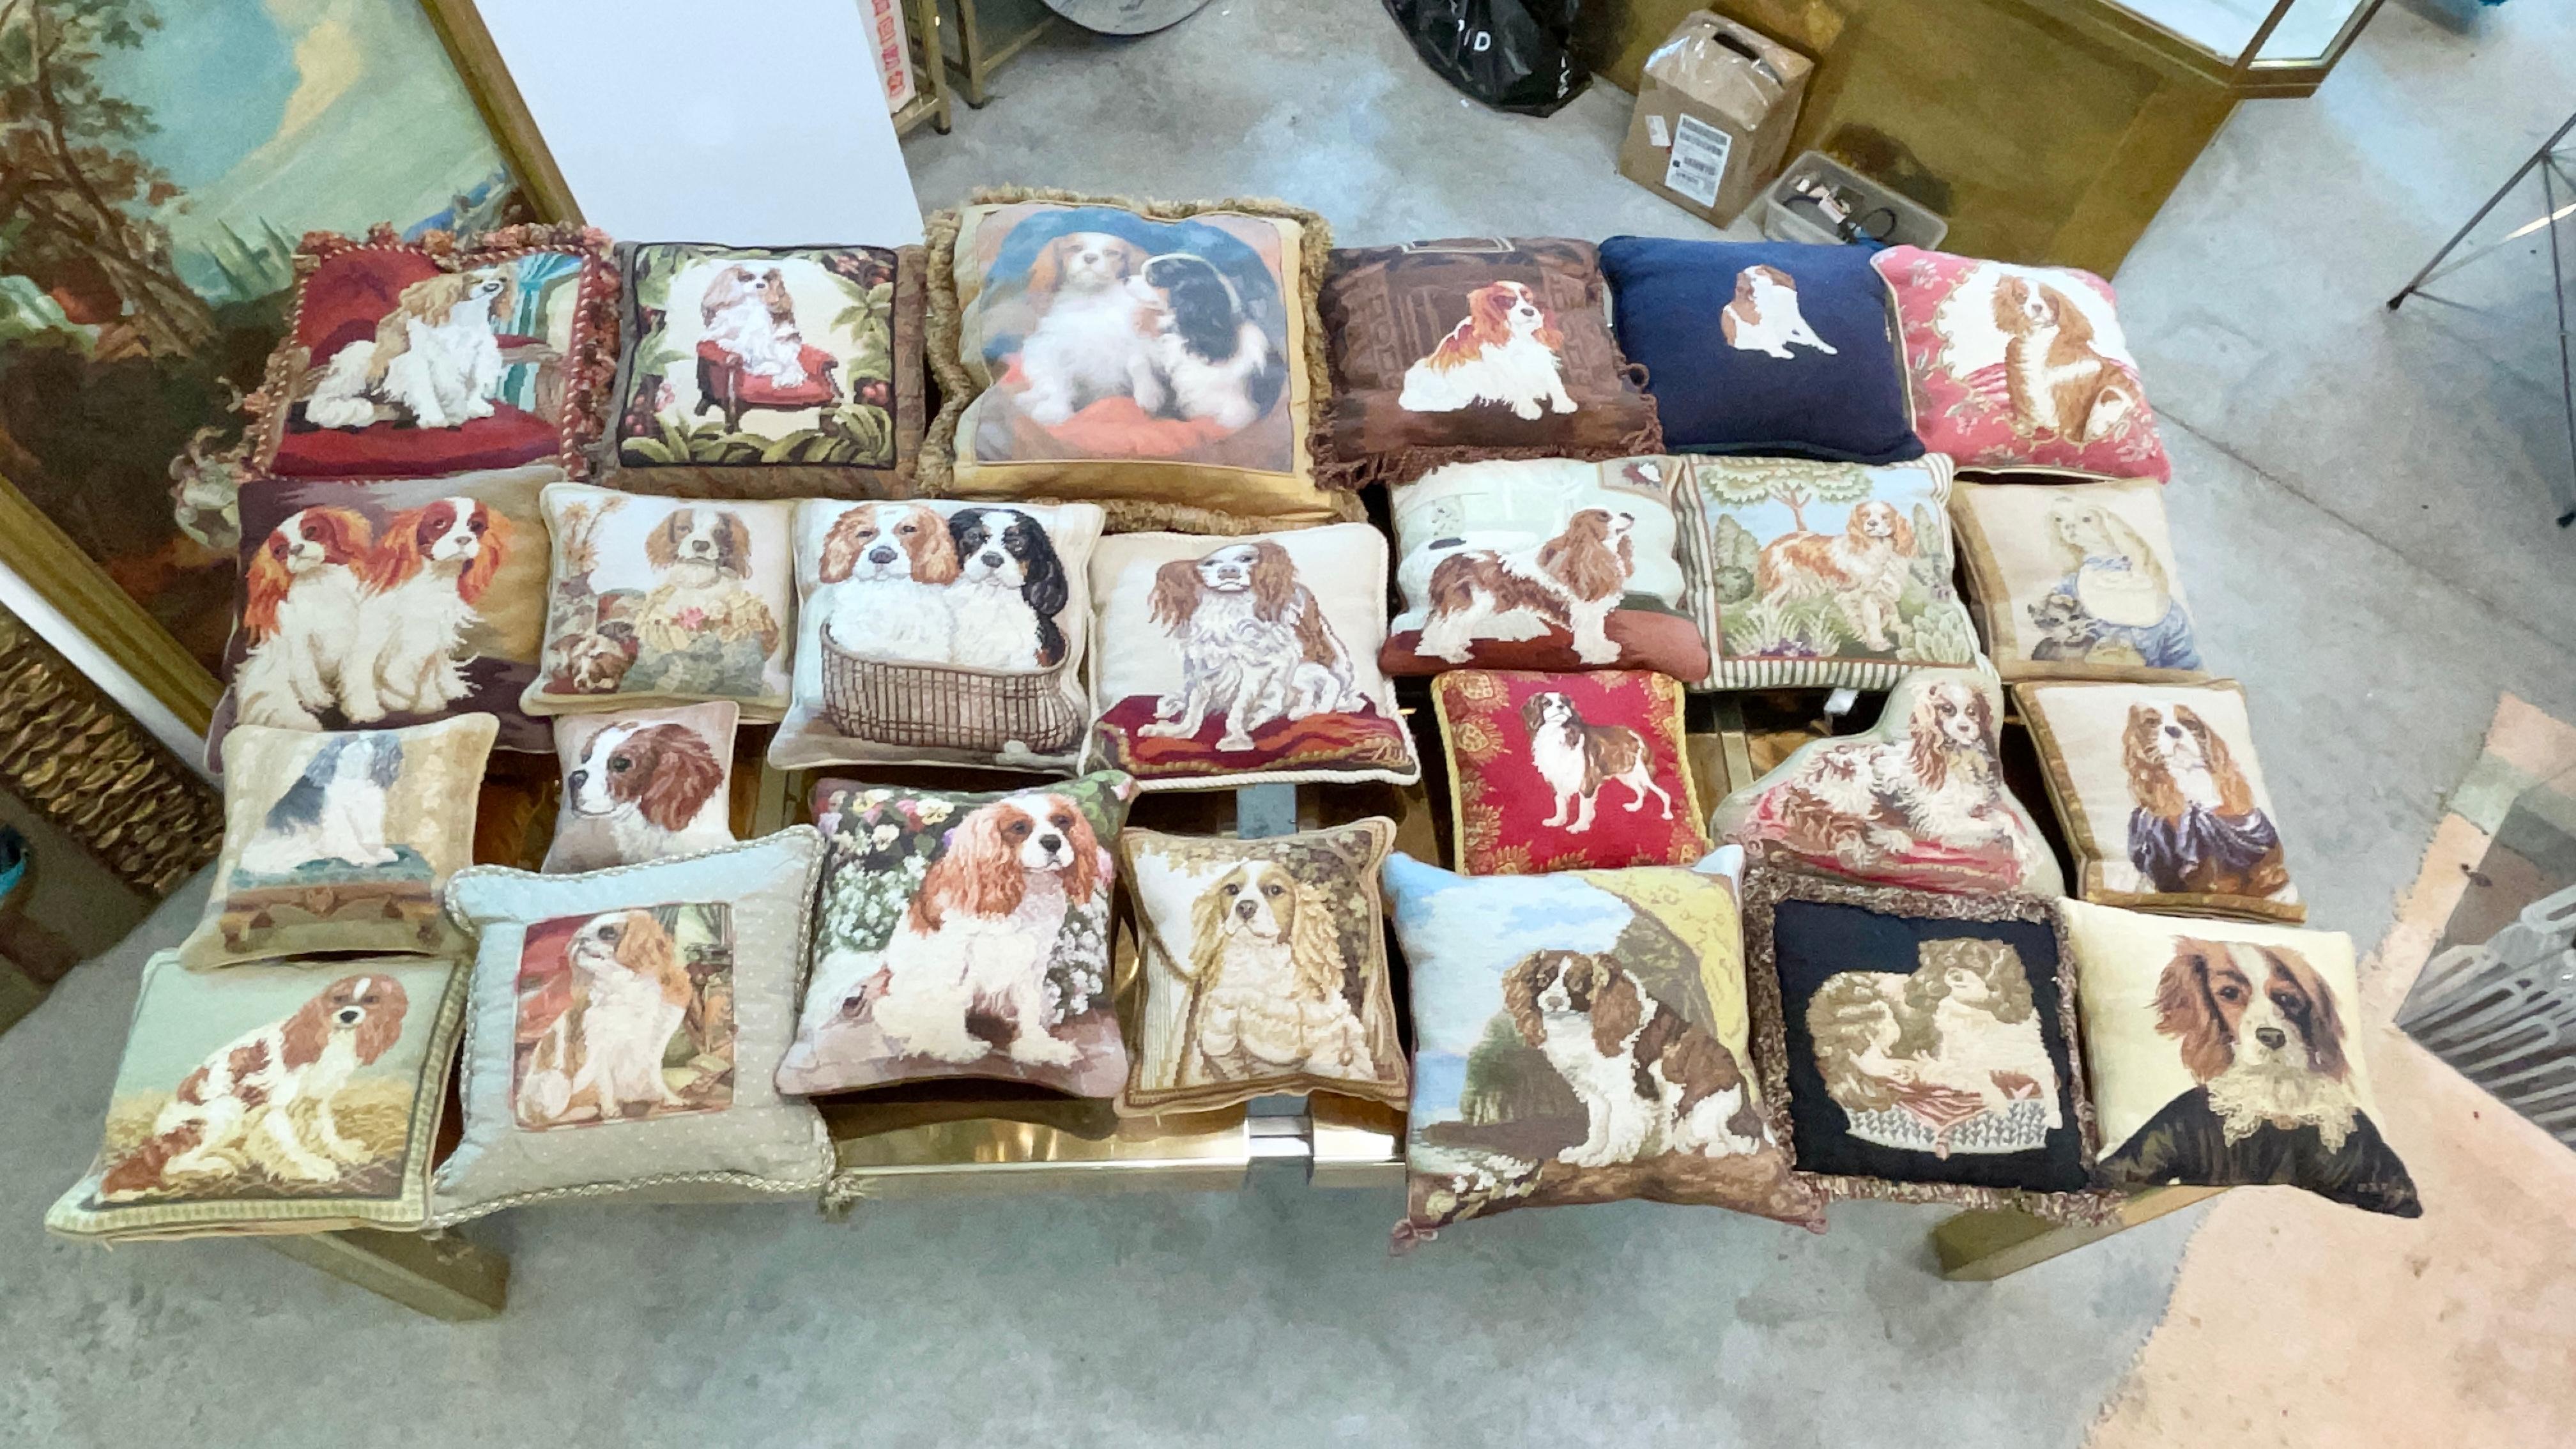 An assorted collection of themed pillows and cushions by various makers and employing various methods of stitchery, embroidery, needlepoint, etc. 
25 in total.
Sold only as a complete set, not individually.

Provenance: Property of an obsessive